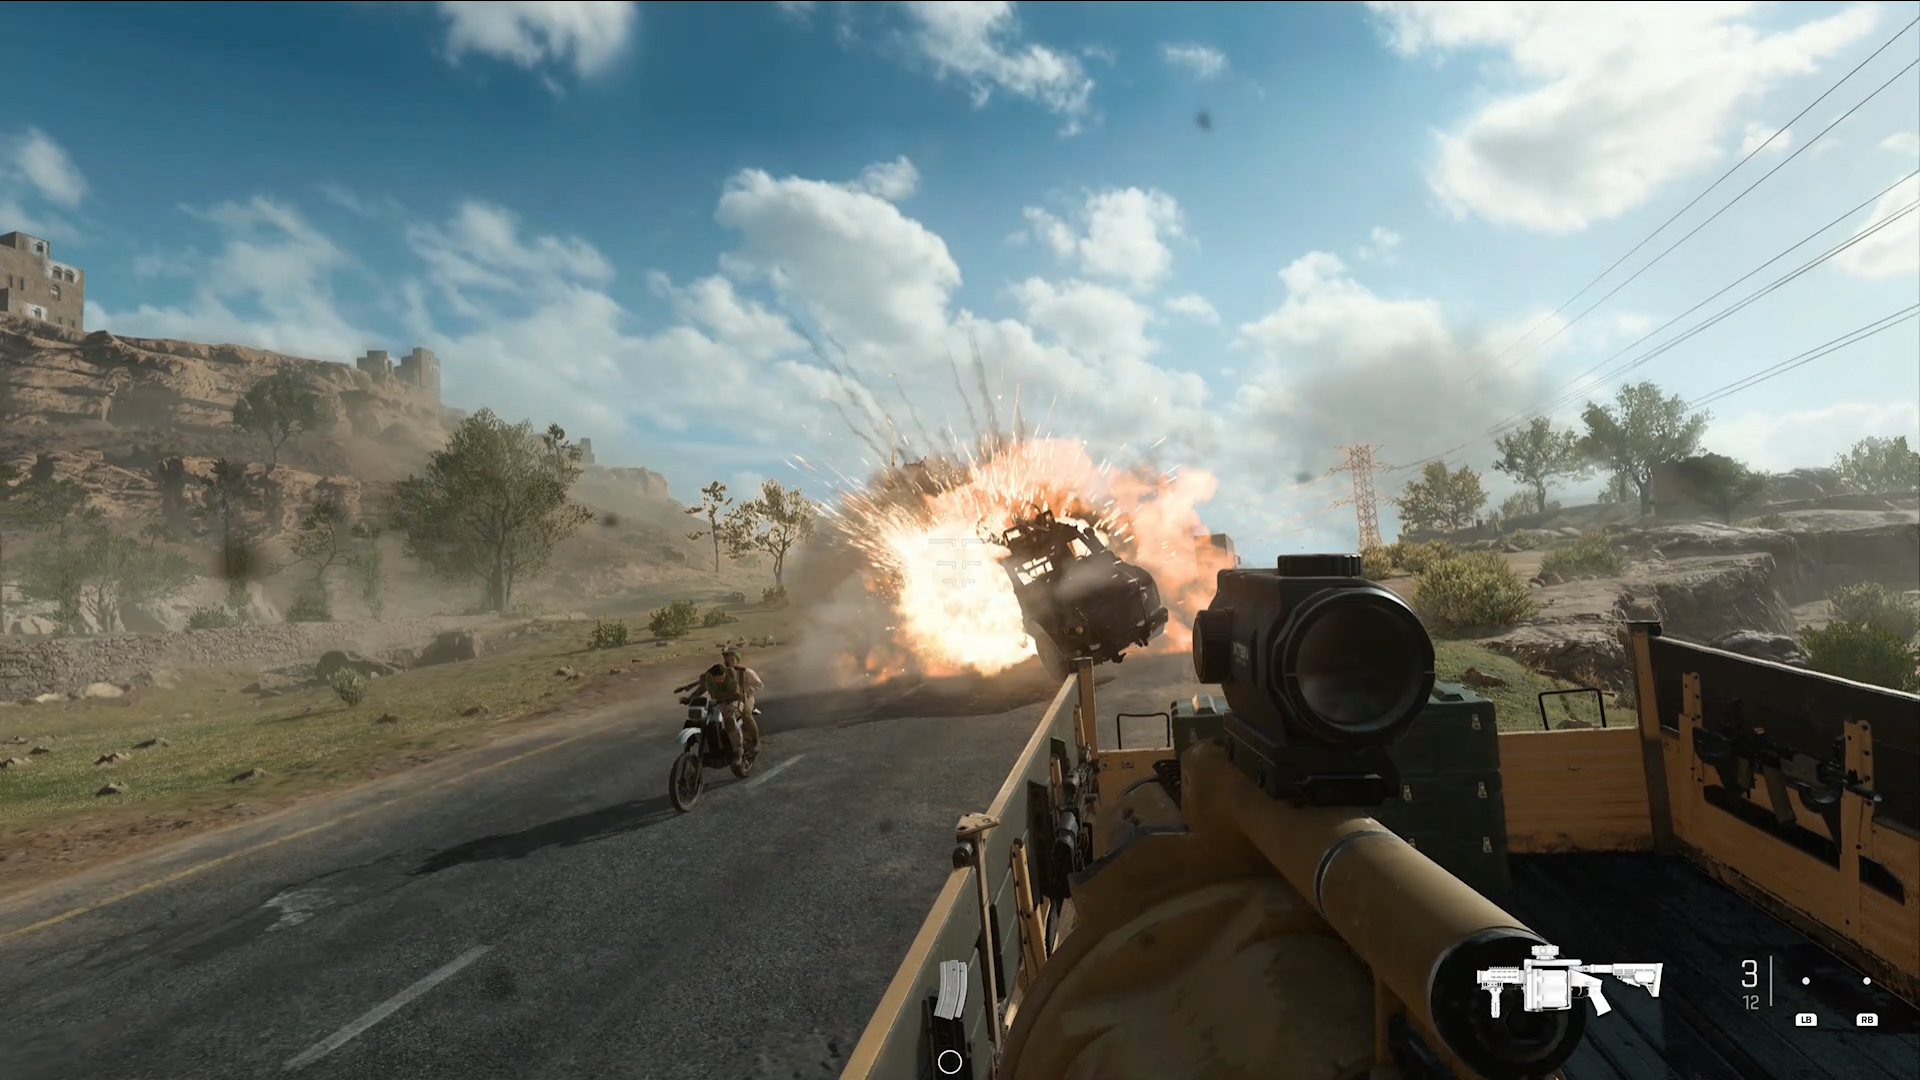 HHW Gaming Review: 'Call of Duty: Modern Warfare 2' Campaign